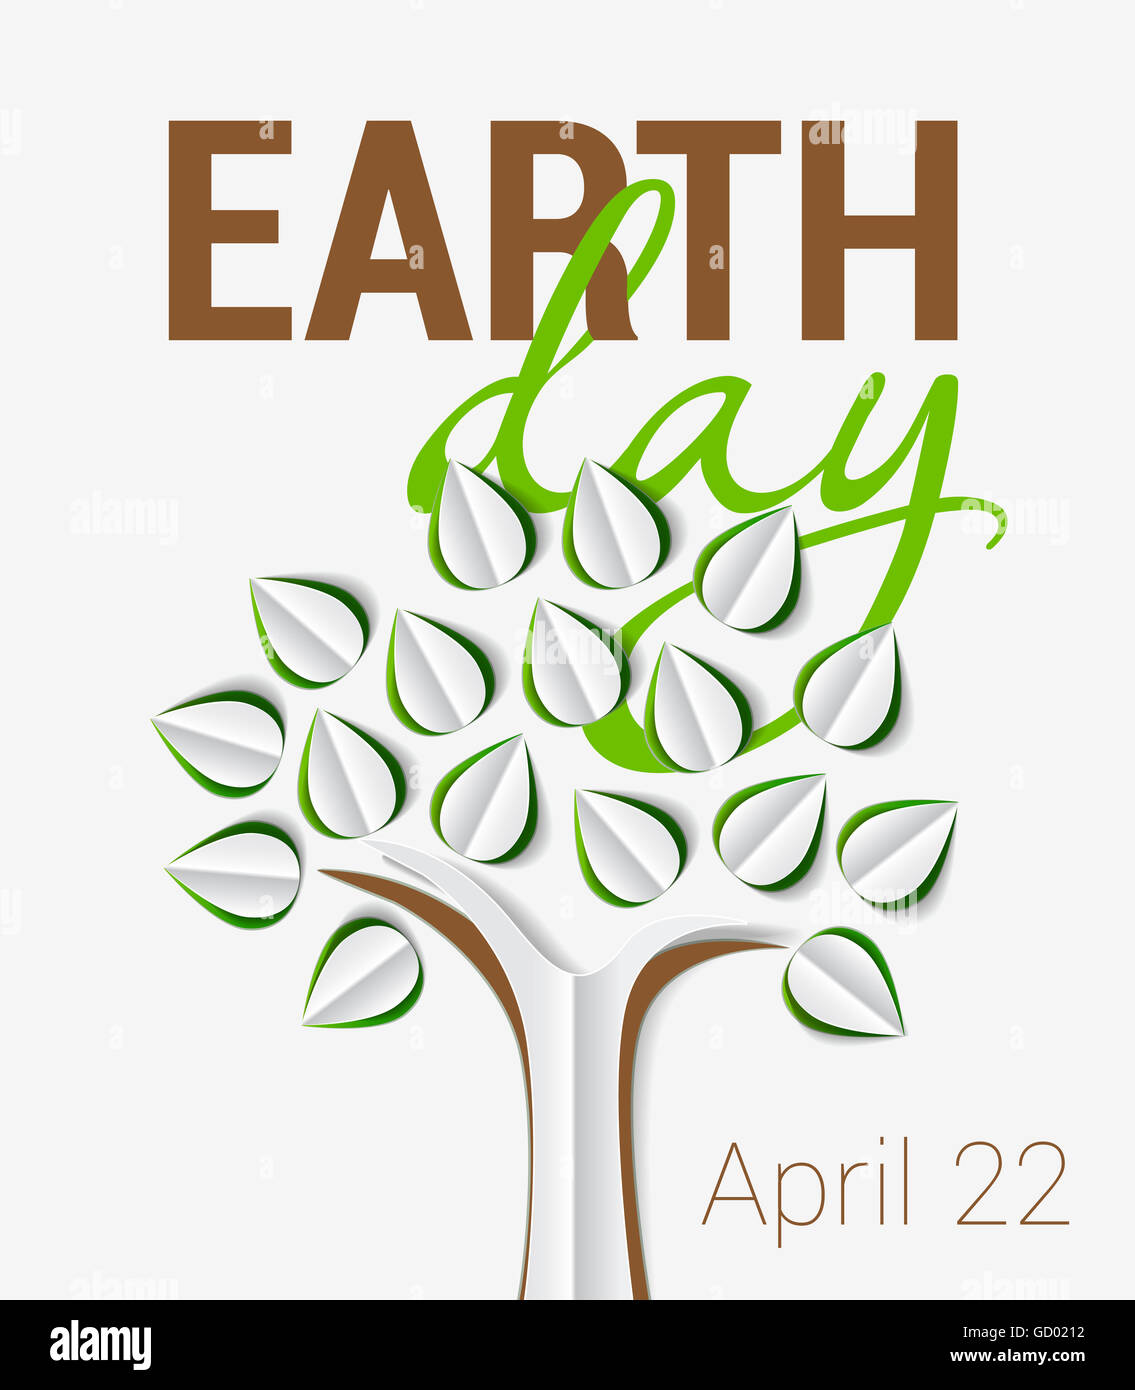 Earth Day greeting with tree made of paper with shadow Stock Photo